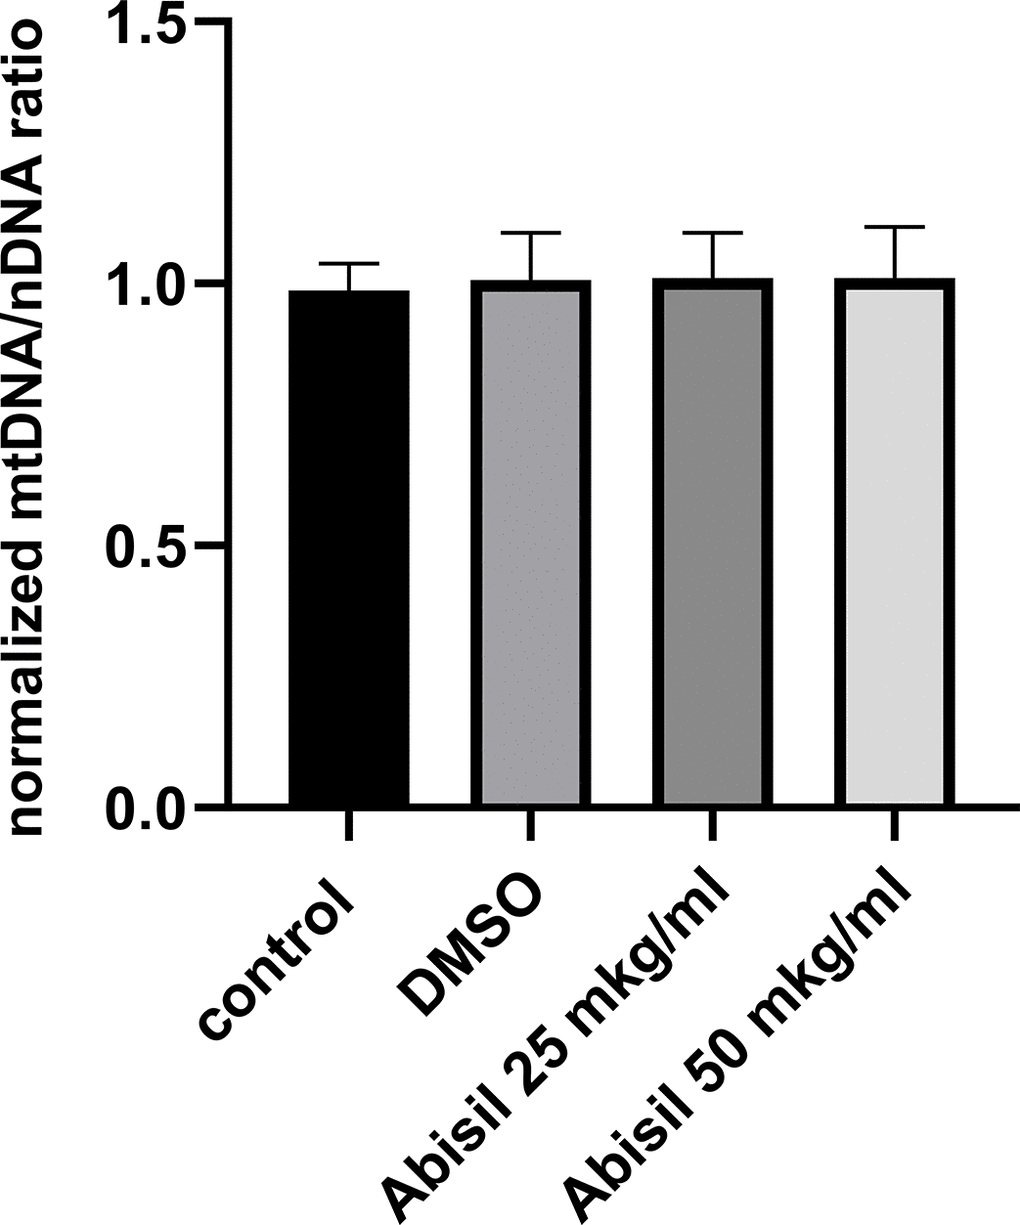 Relative mitochondrial copy number determined by qPCR in MRC5-SV40 cells, untreated (control), treated with DMSO or Abisil (16 hours after treatment). The mtDNA/nDNA copy number ratio was normalized to DMSO treated samples.